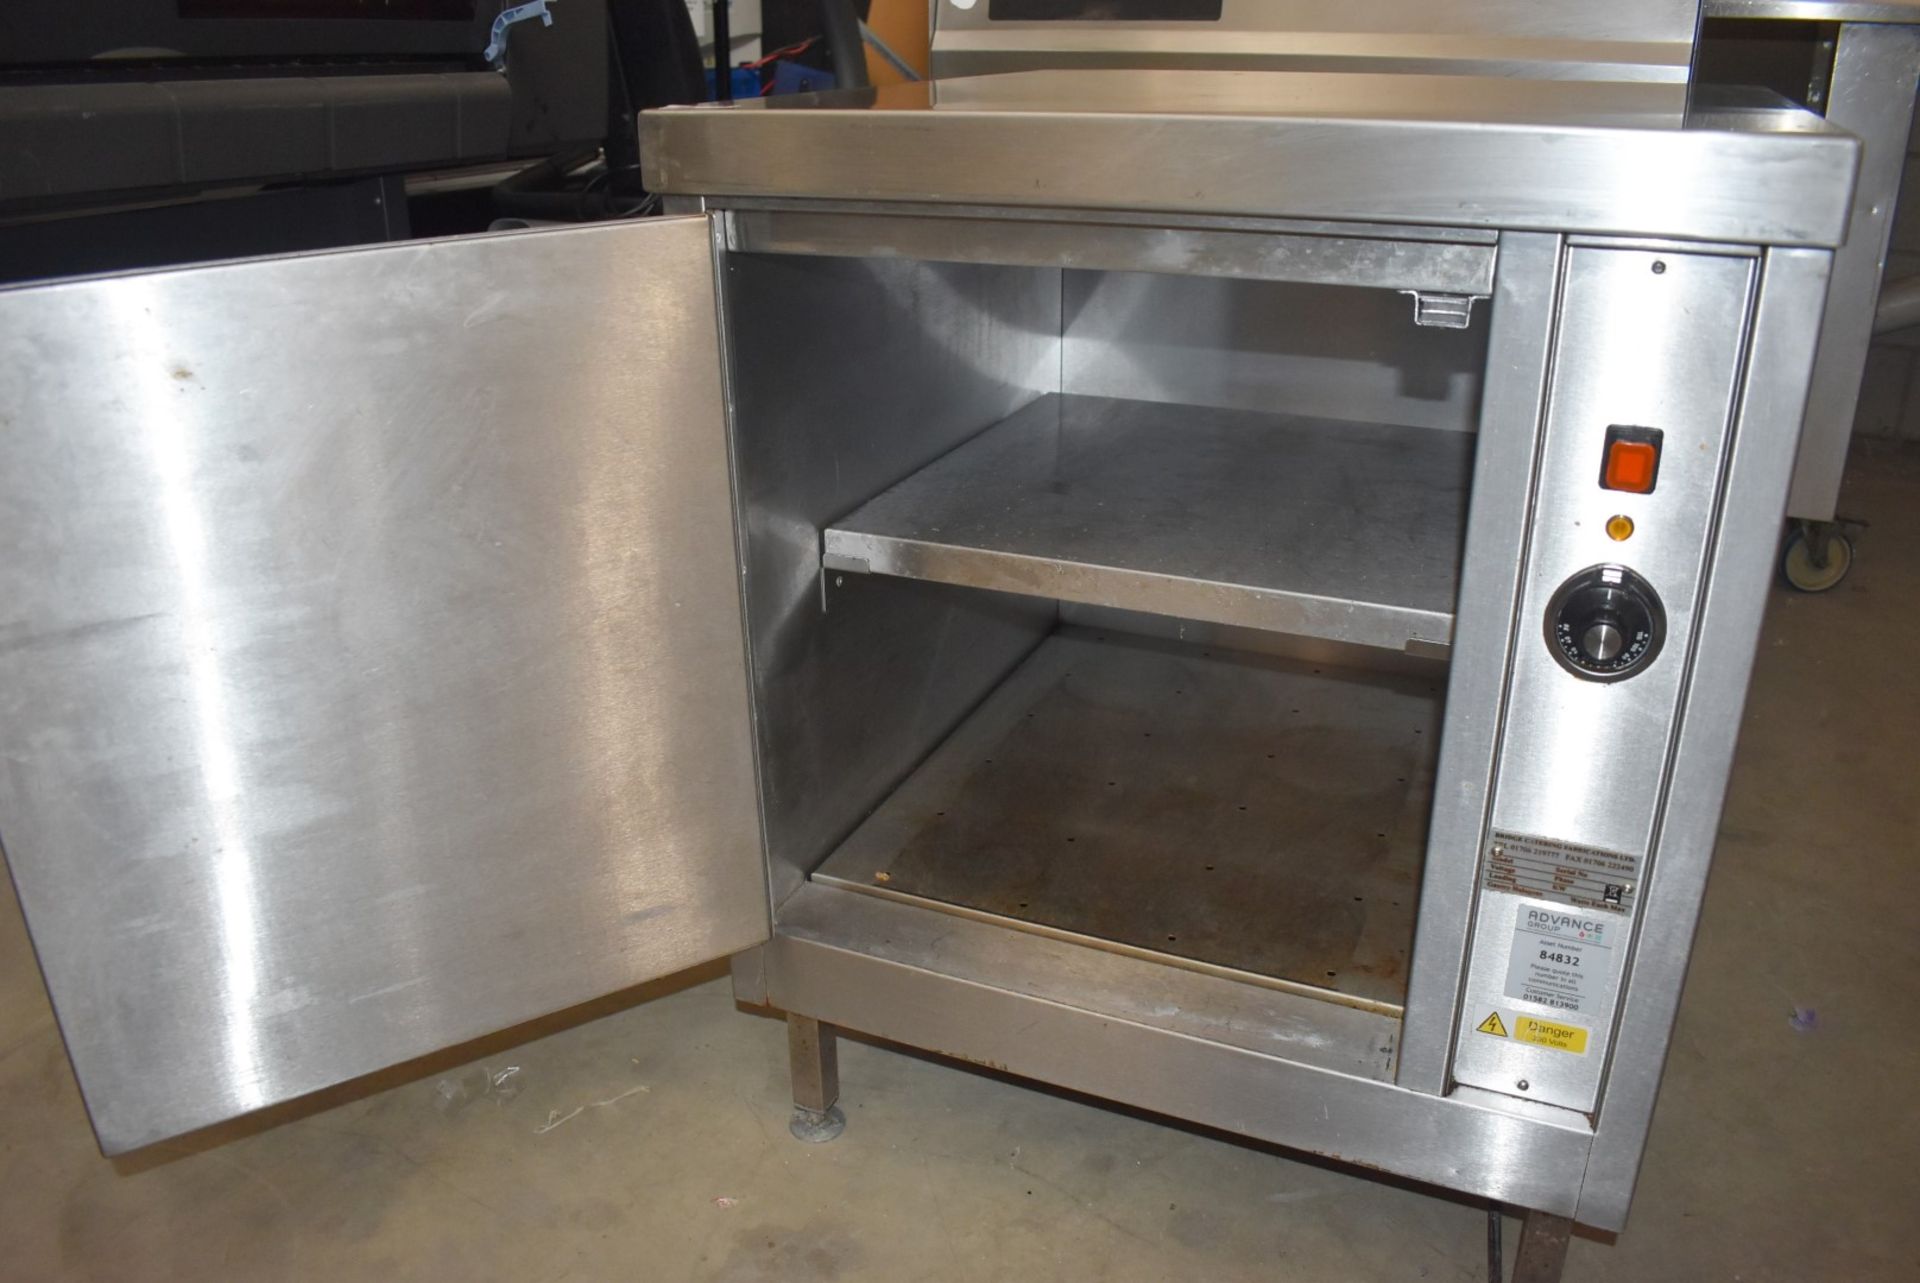 1 x Stainless Steel Warming / Holding Cabinet By Bridge Catering - 240v - With Prep Counter Top - - Image 6 of 8